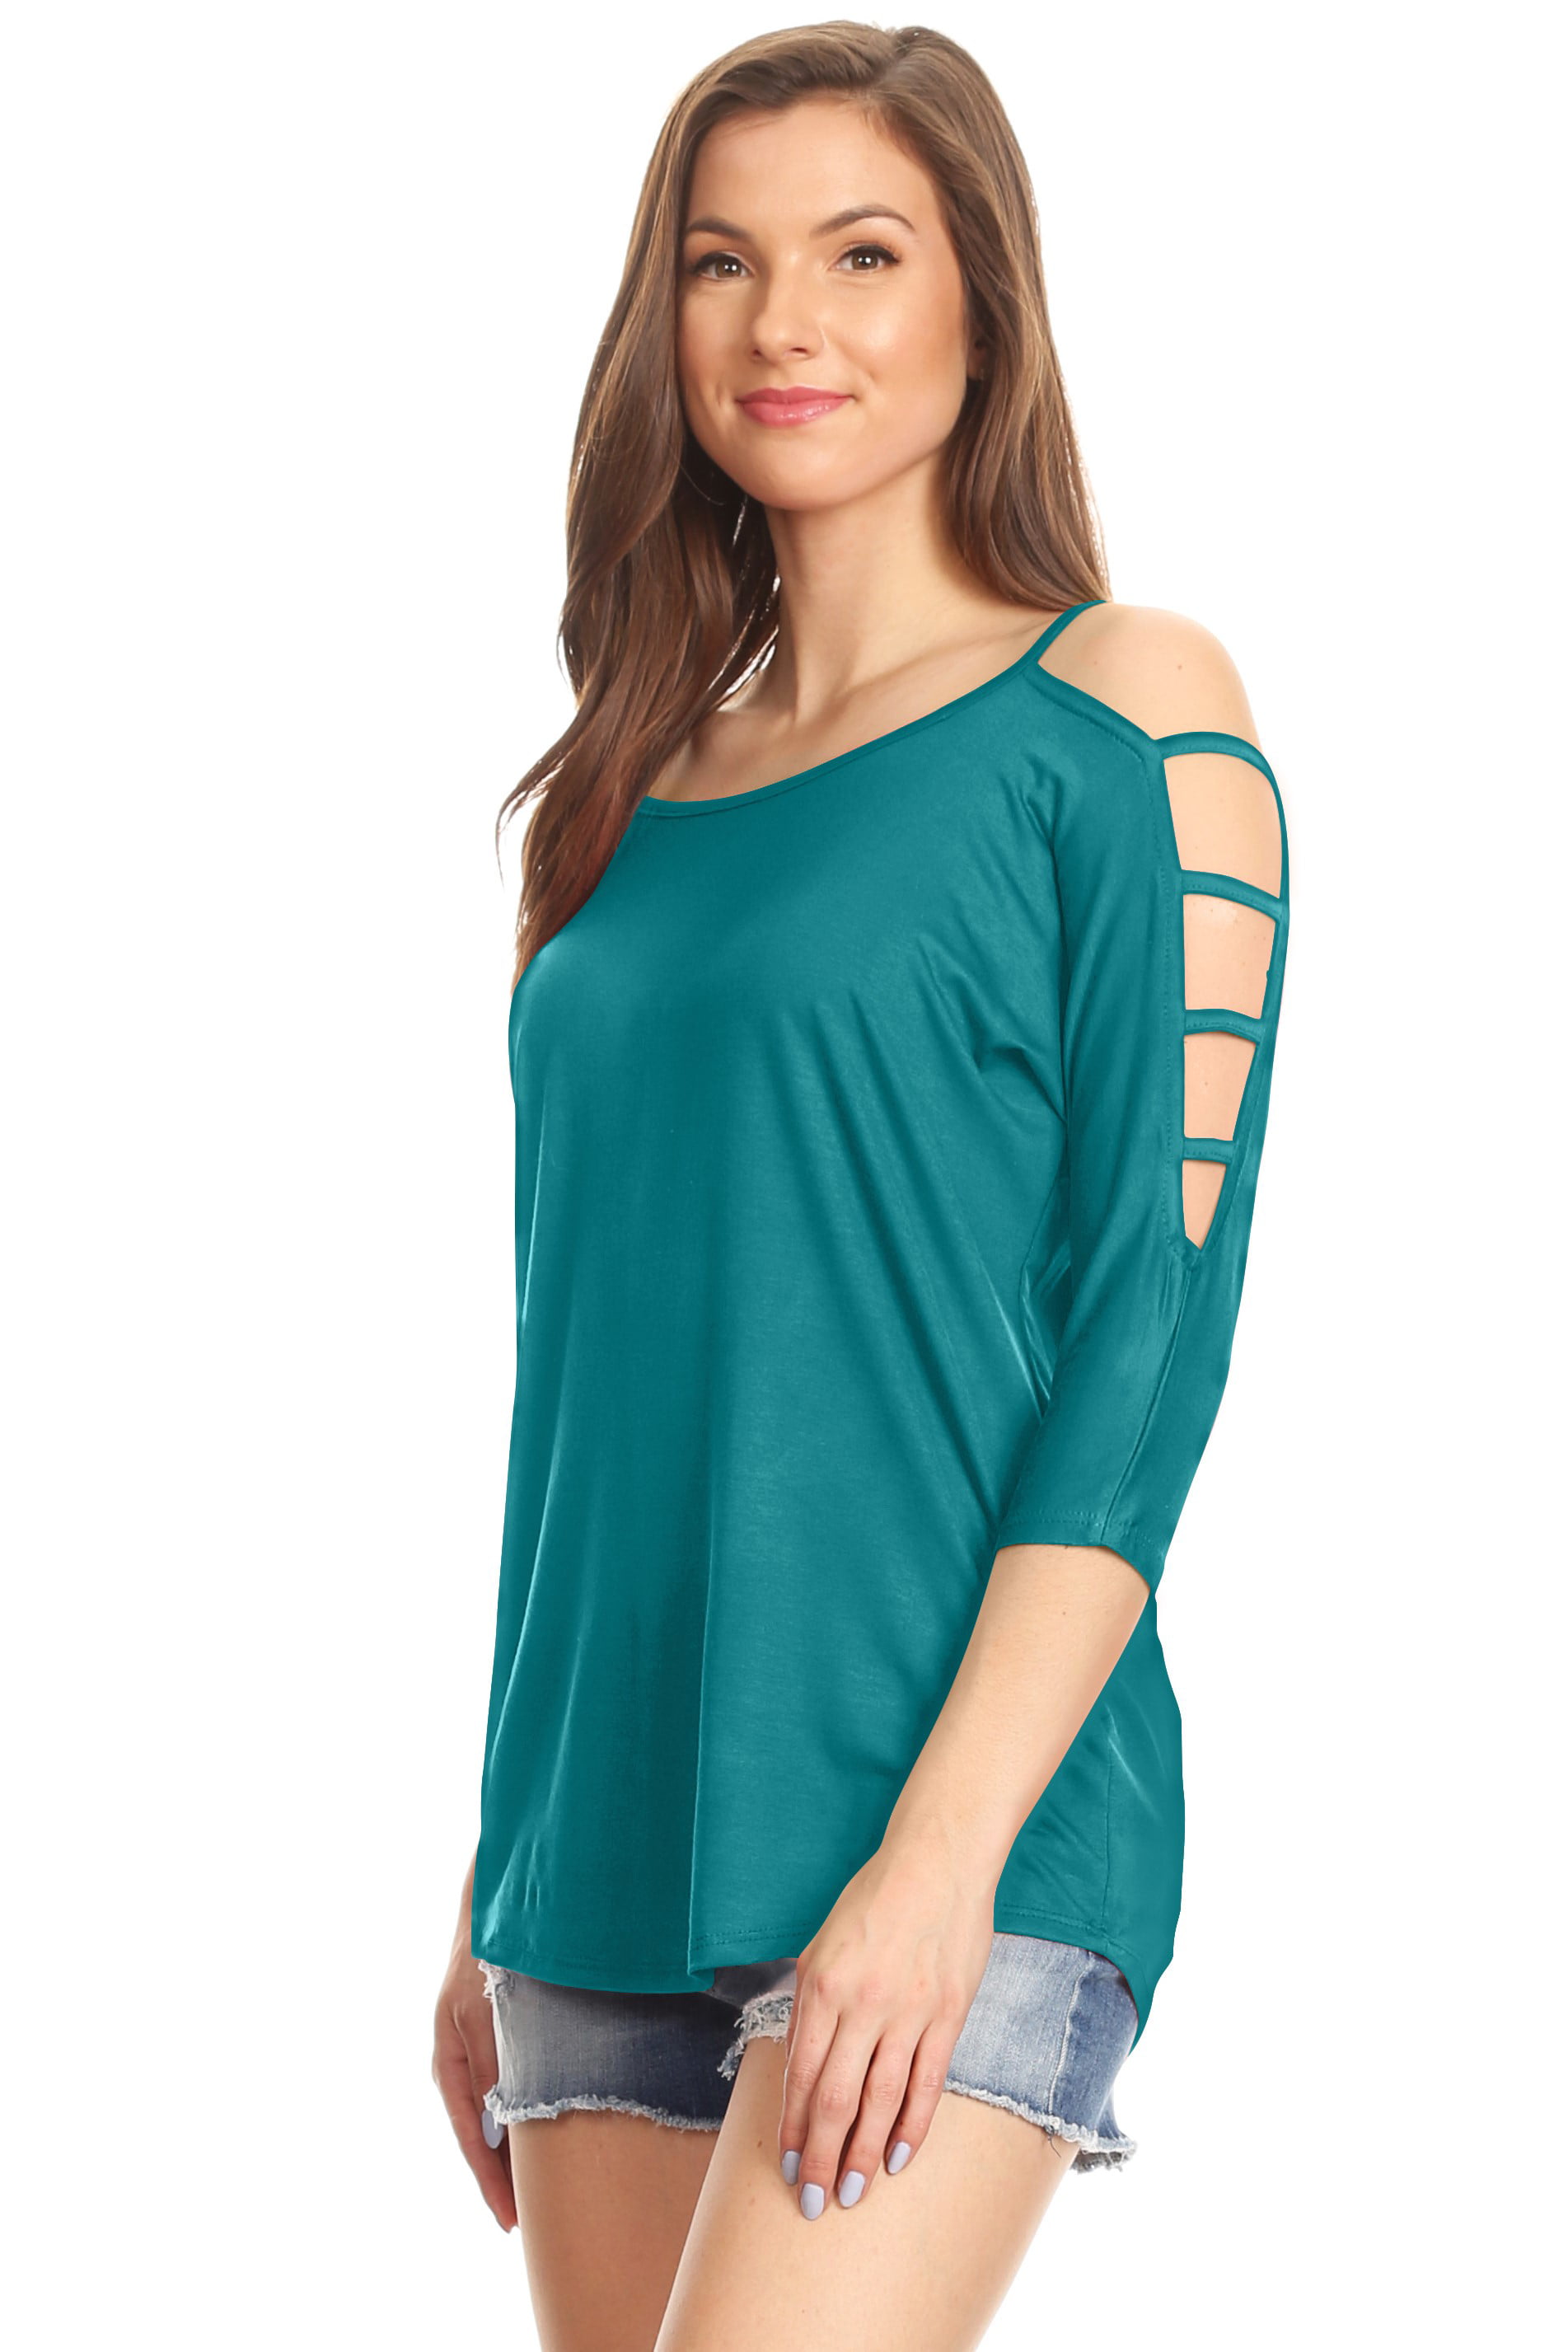 Simlu - Womens Sexy Cold Shoulder Tops Cut Out Long Sleeve Summer ...